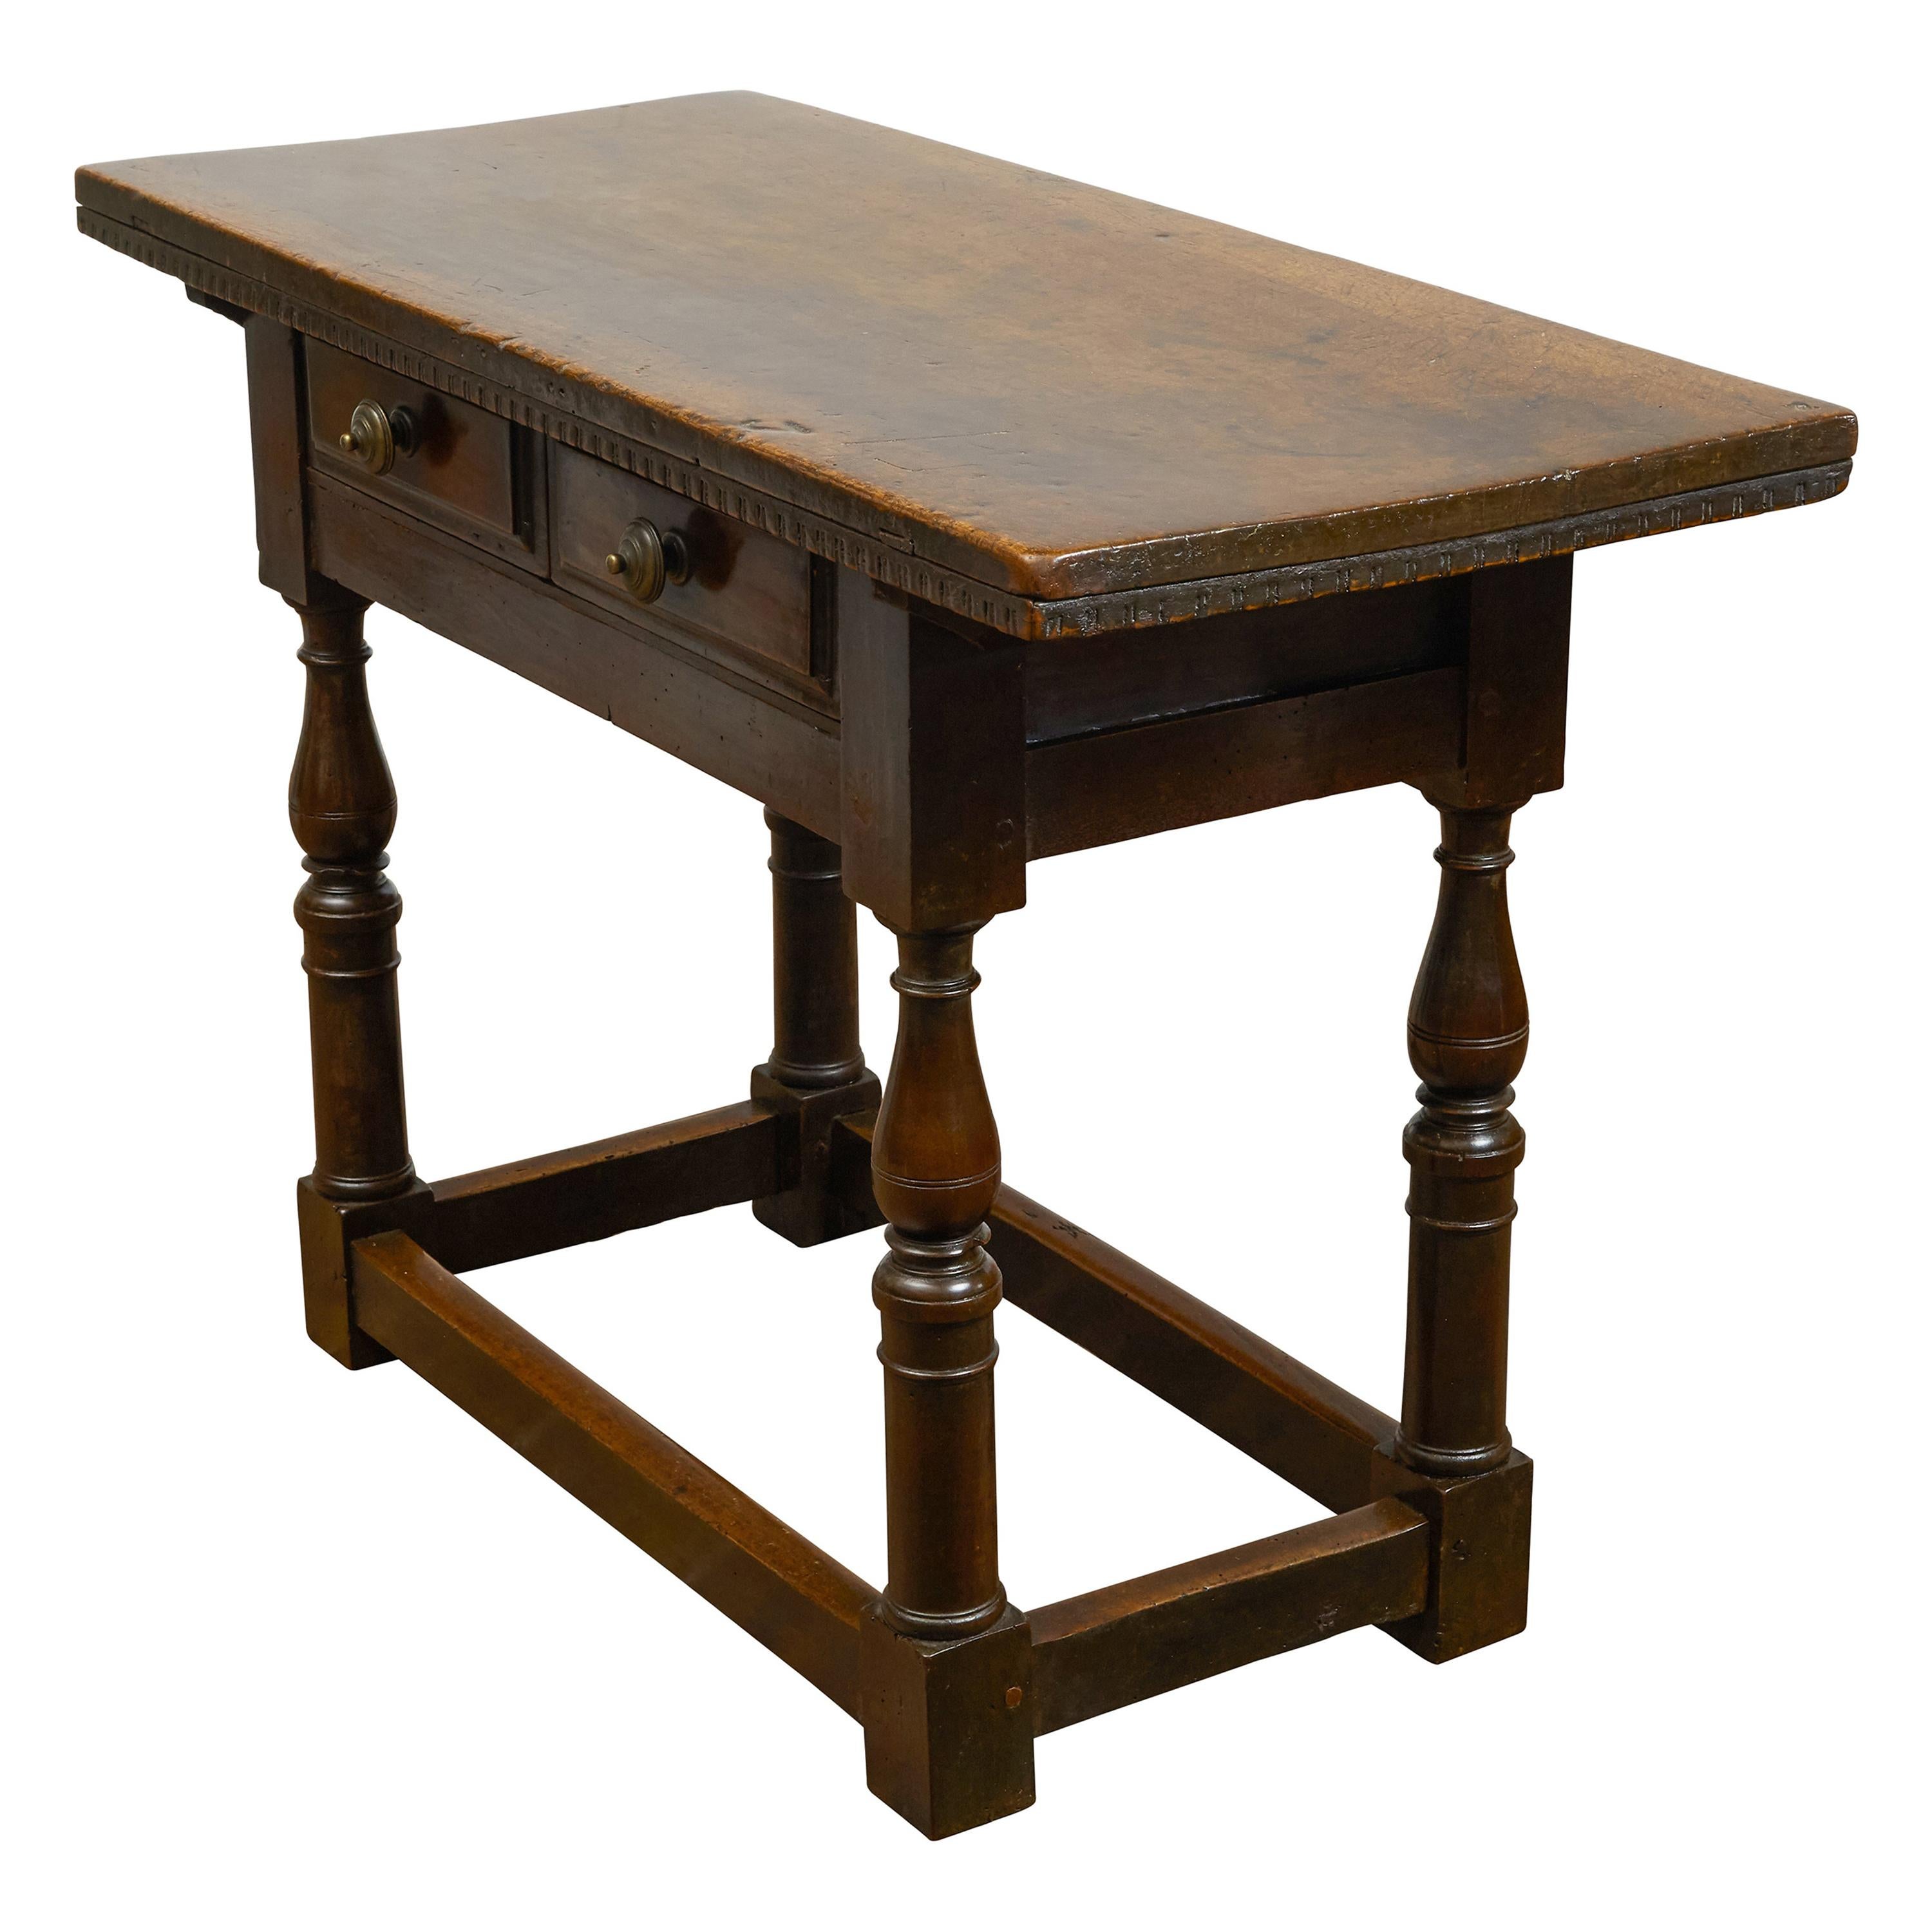 Italian 1800s Walnut Table with Two Drawers, Turned Legs and Dentil Molding